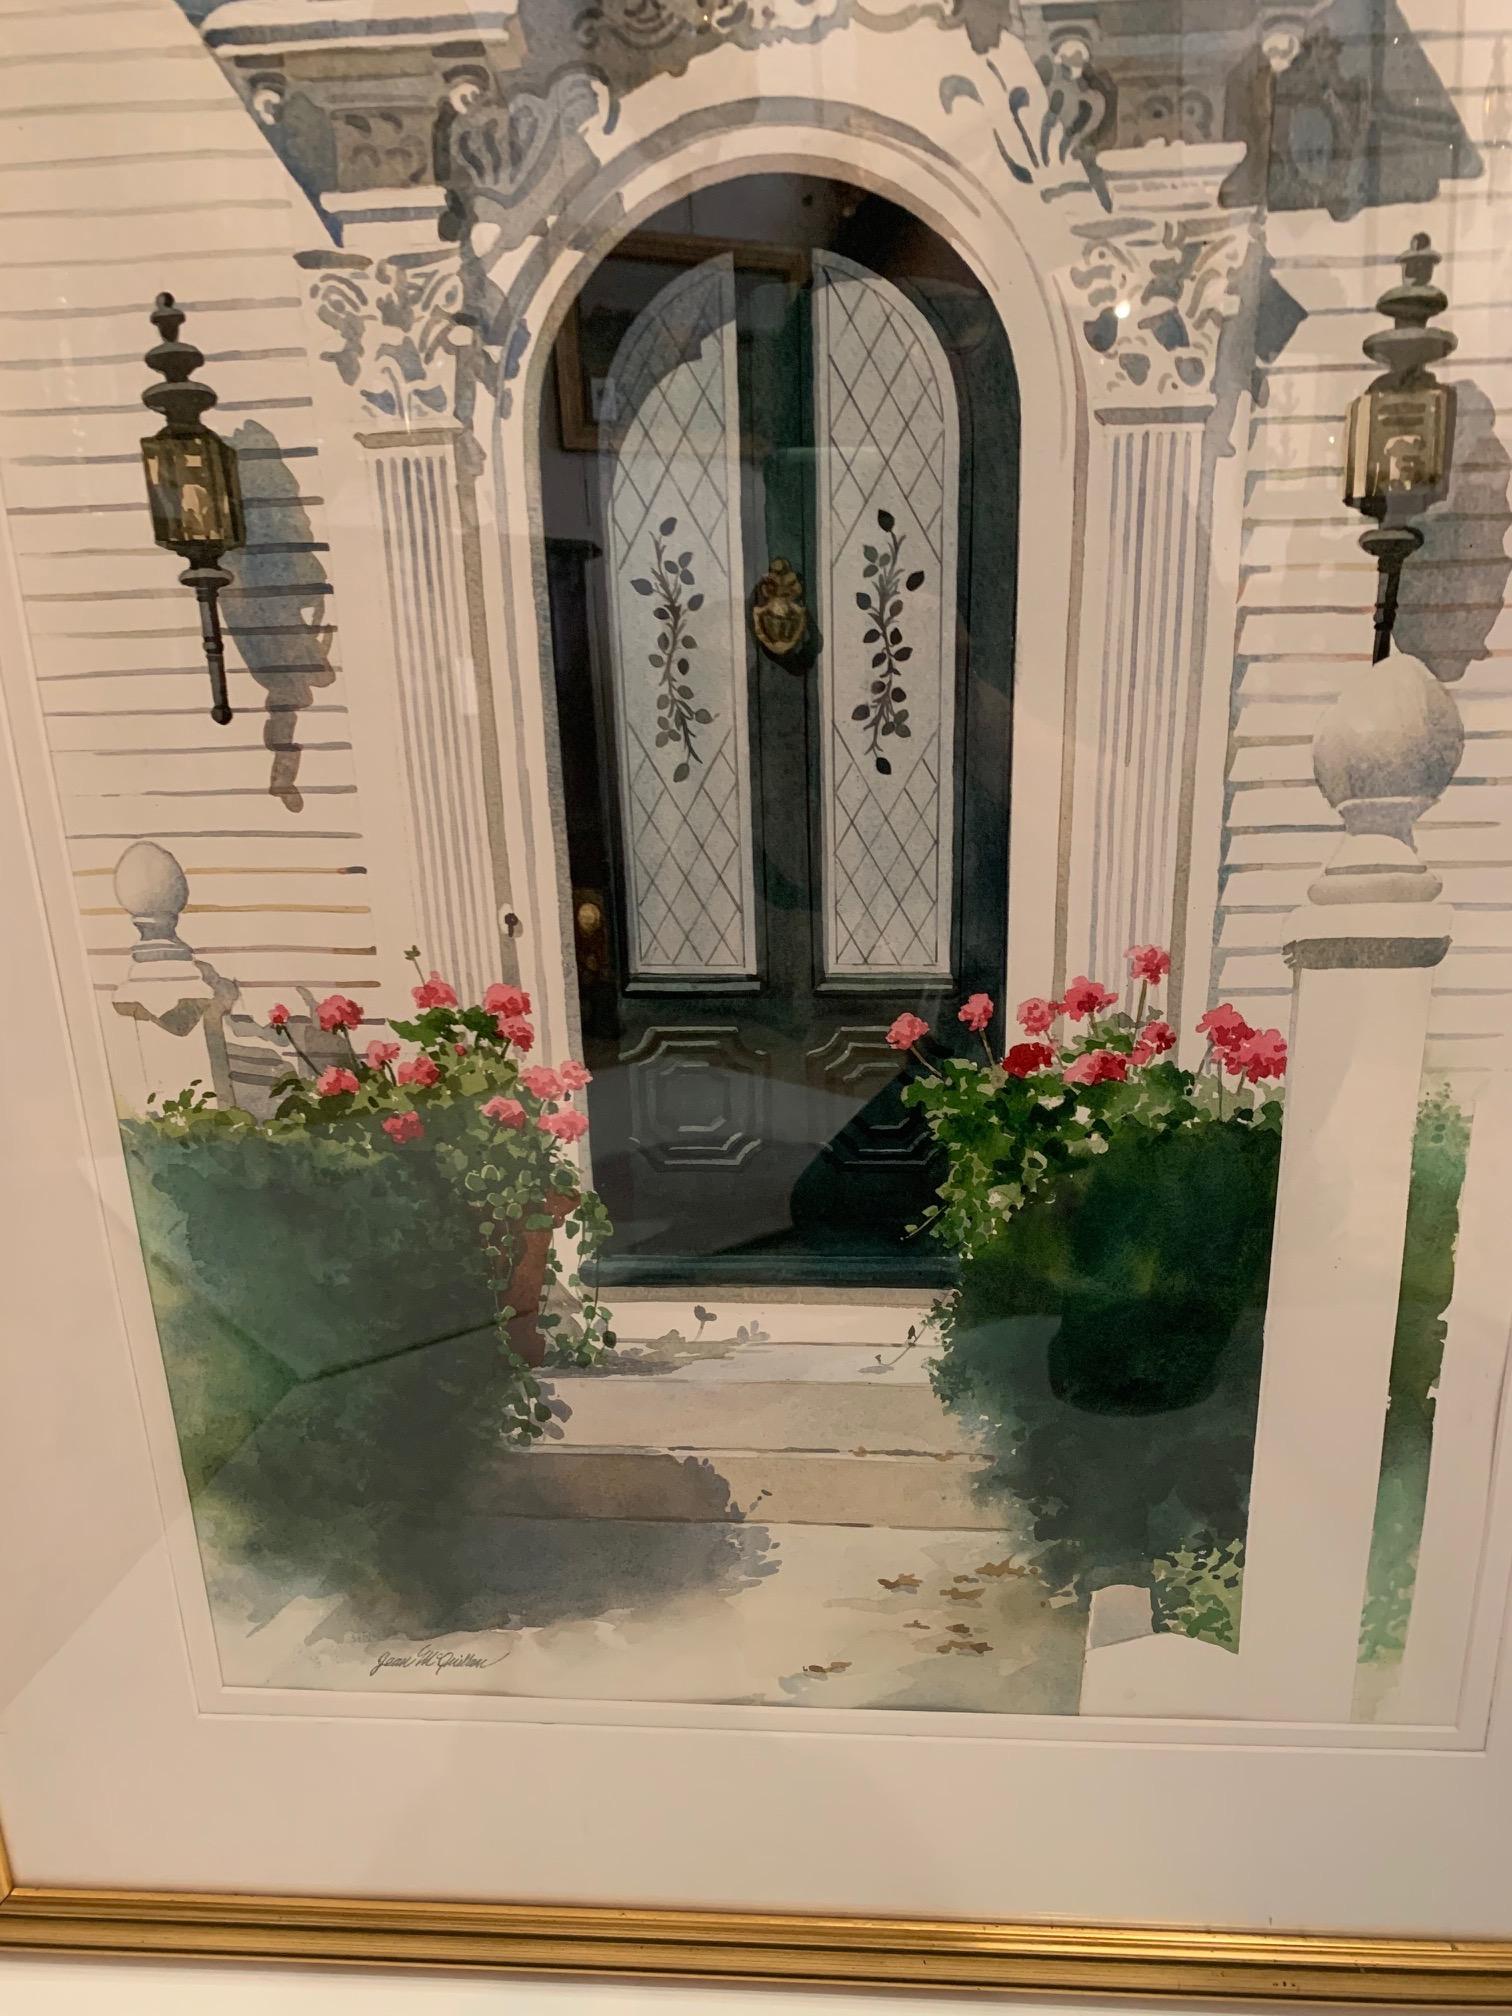 A charming Vermont or Nantuckety doorway rendered beautifully in watercolor by artist Jean McQuillan.
Signed and nicely framed.